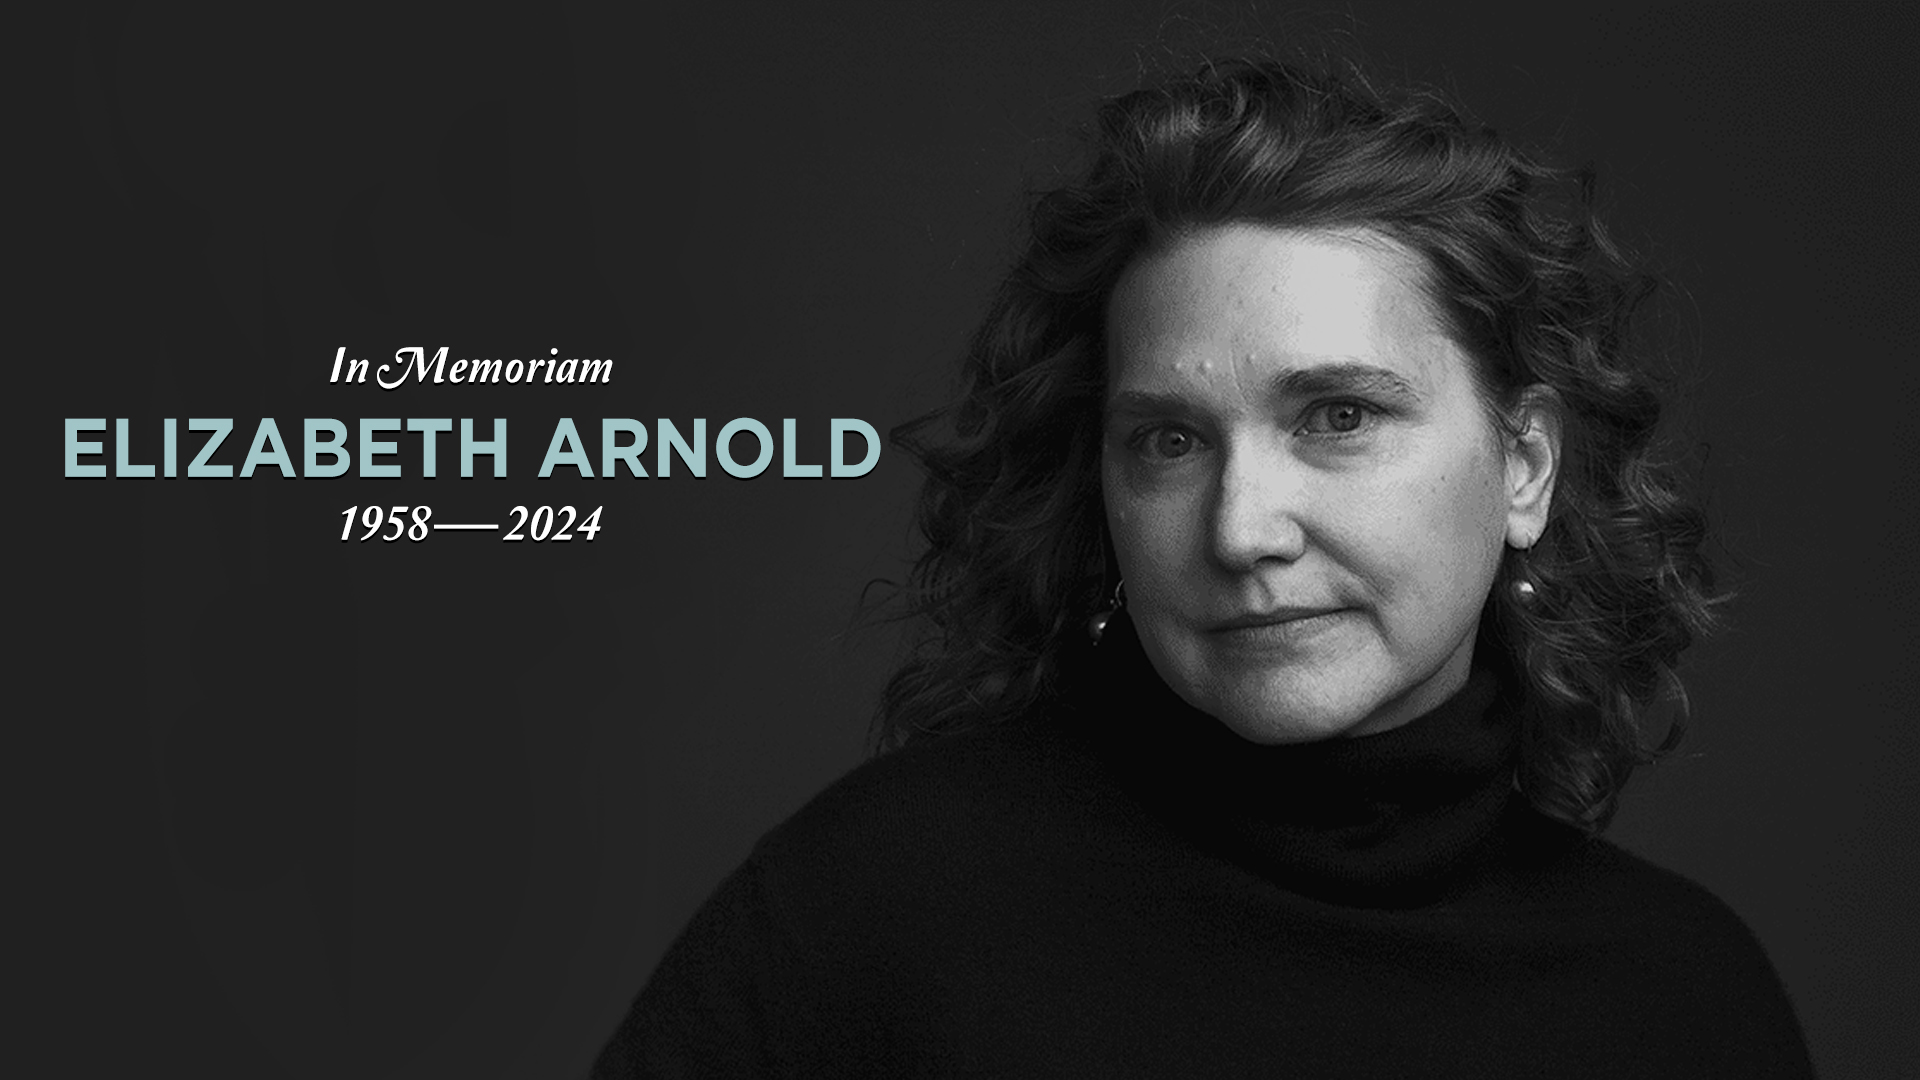 Black and white photo of Elizabeth Arnold with "In Memoriam" superimposed in light blue text